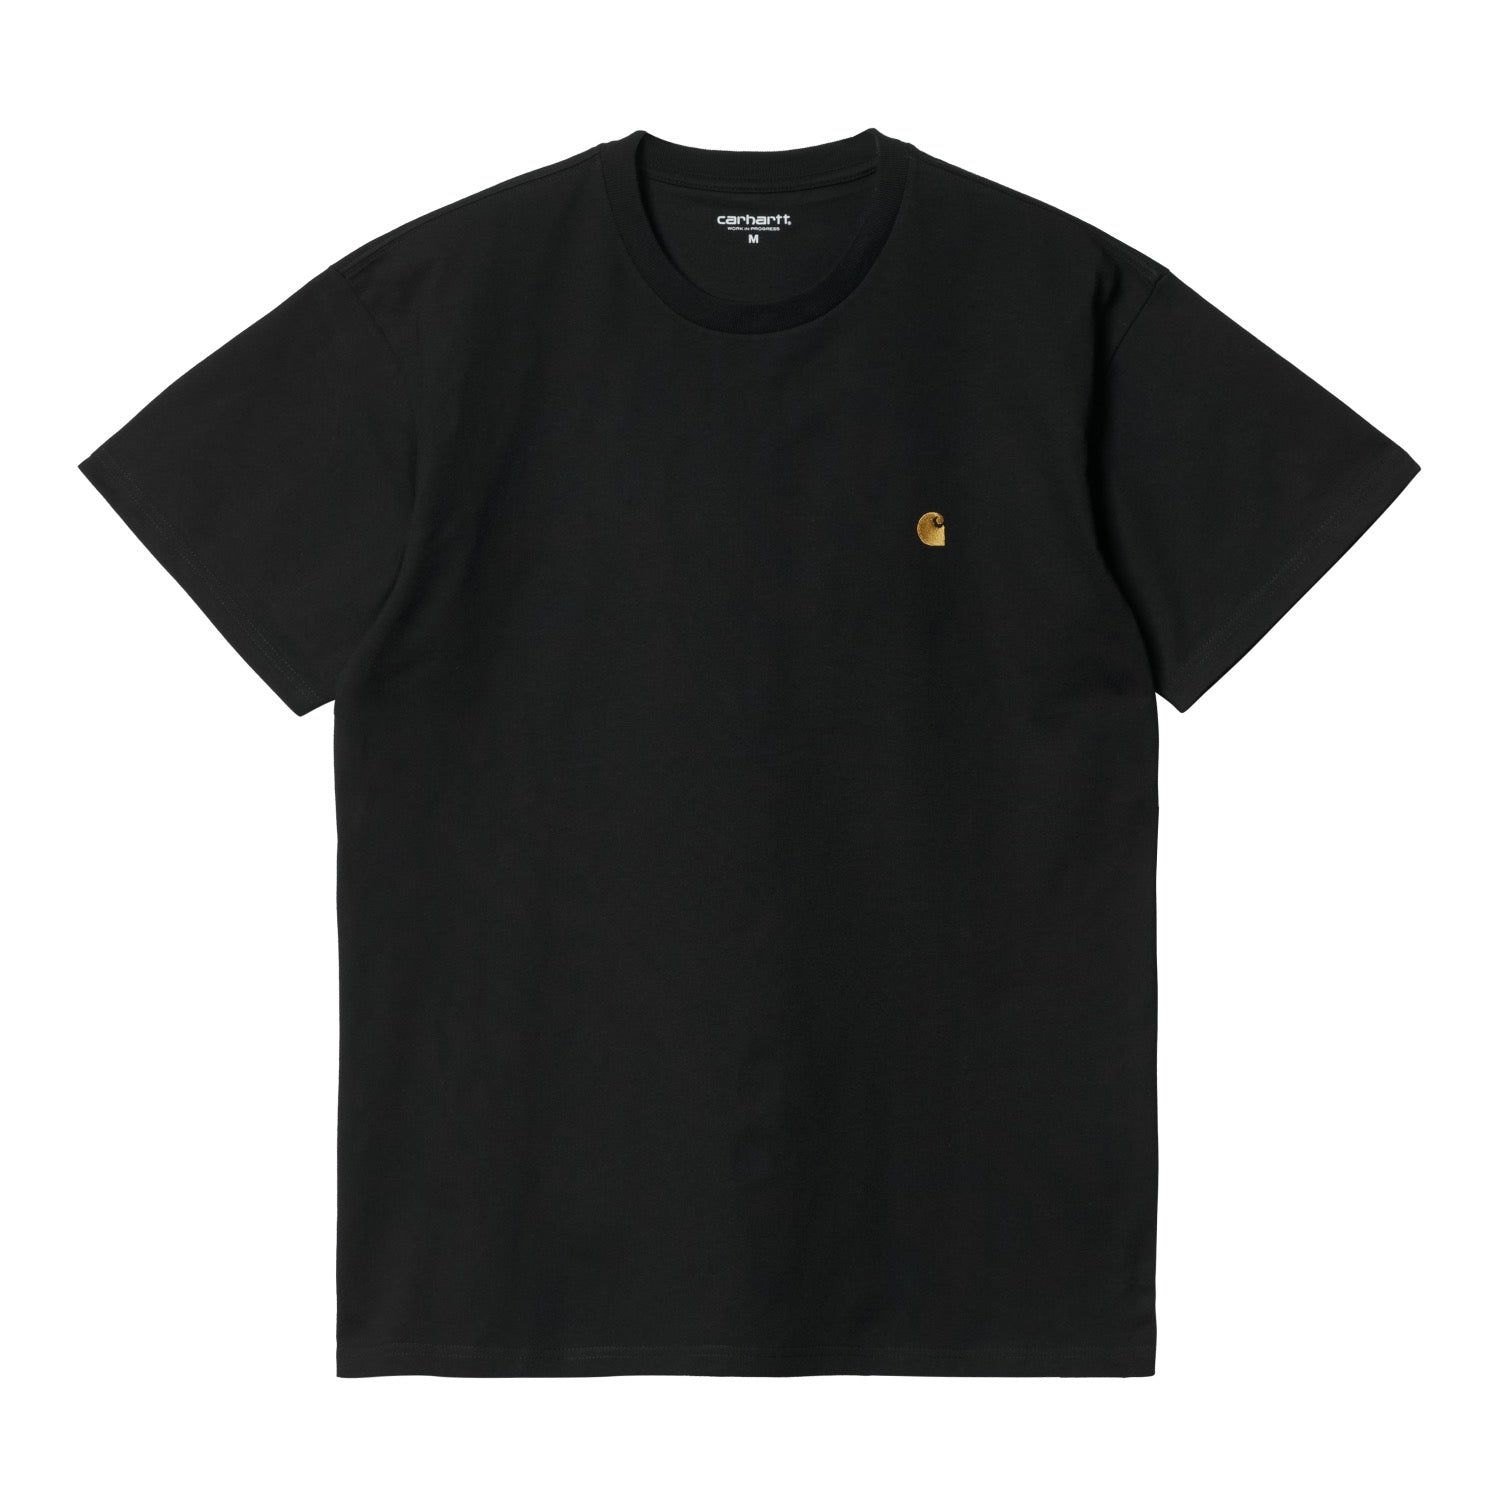 CARHARTT WIP S/S CHASE T-SHIRT (Black / Gold) I026391 公式通販